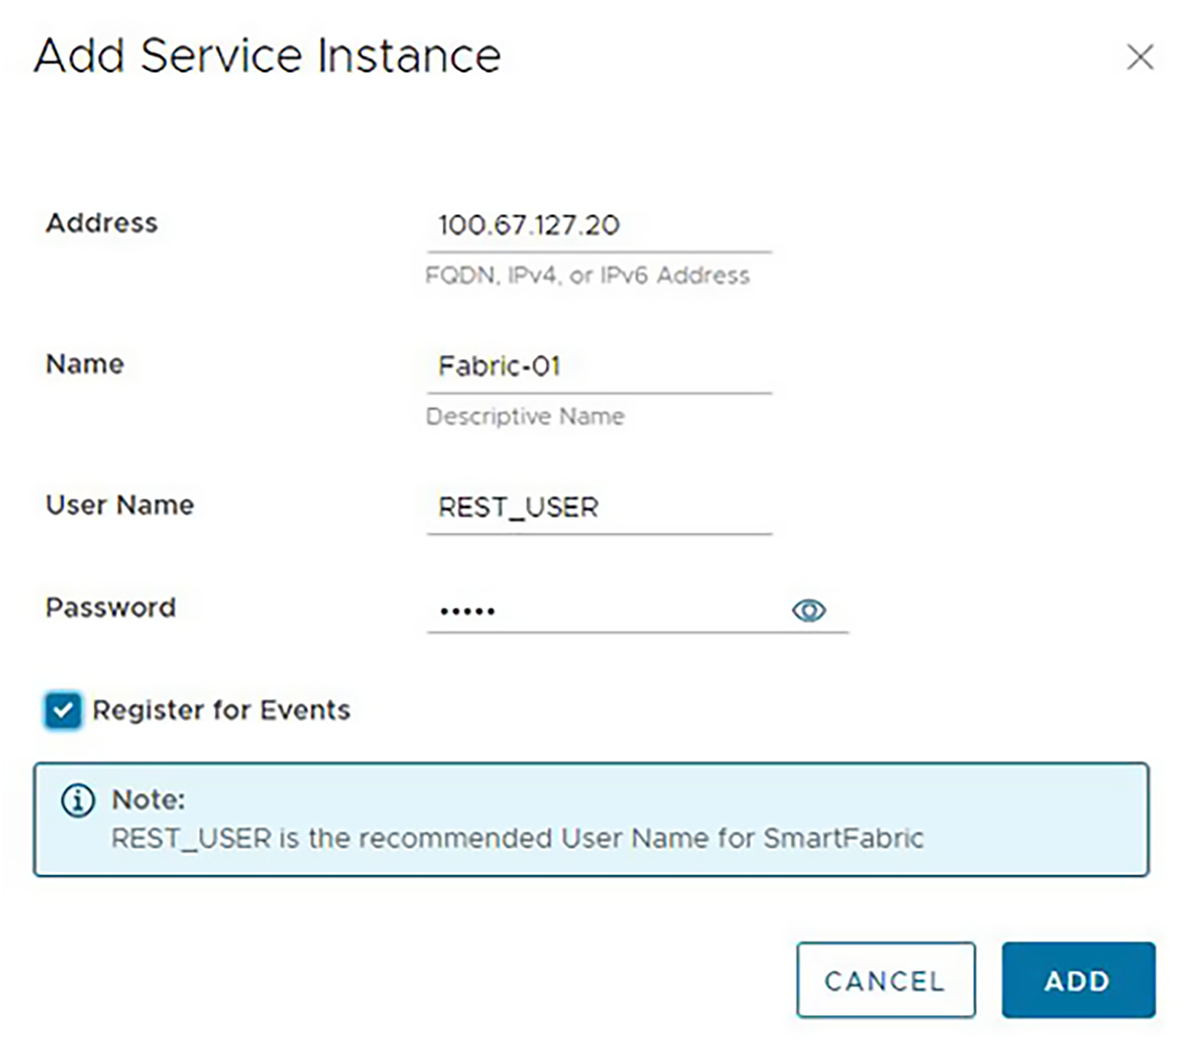 Example of adding a service instance